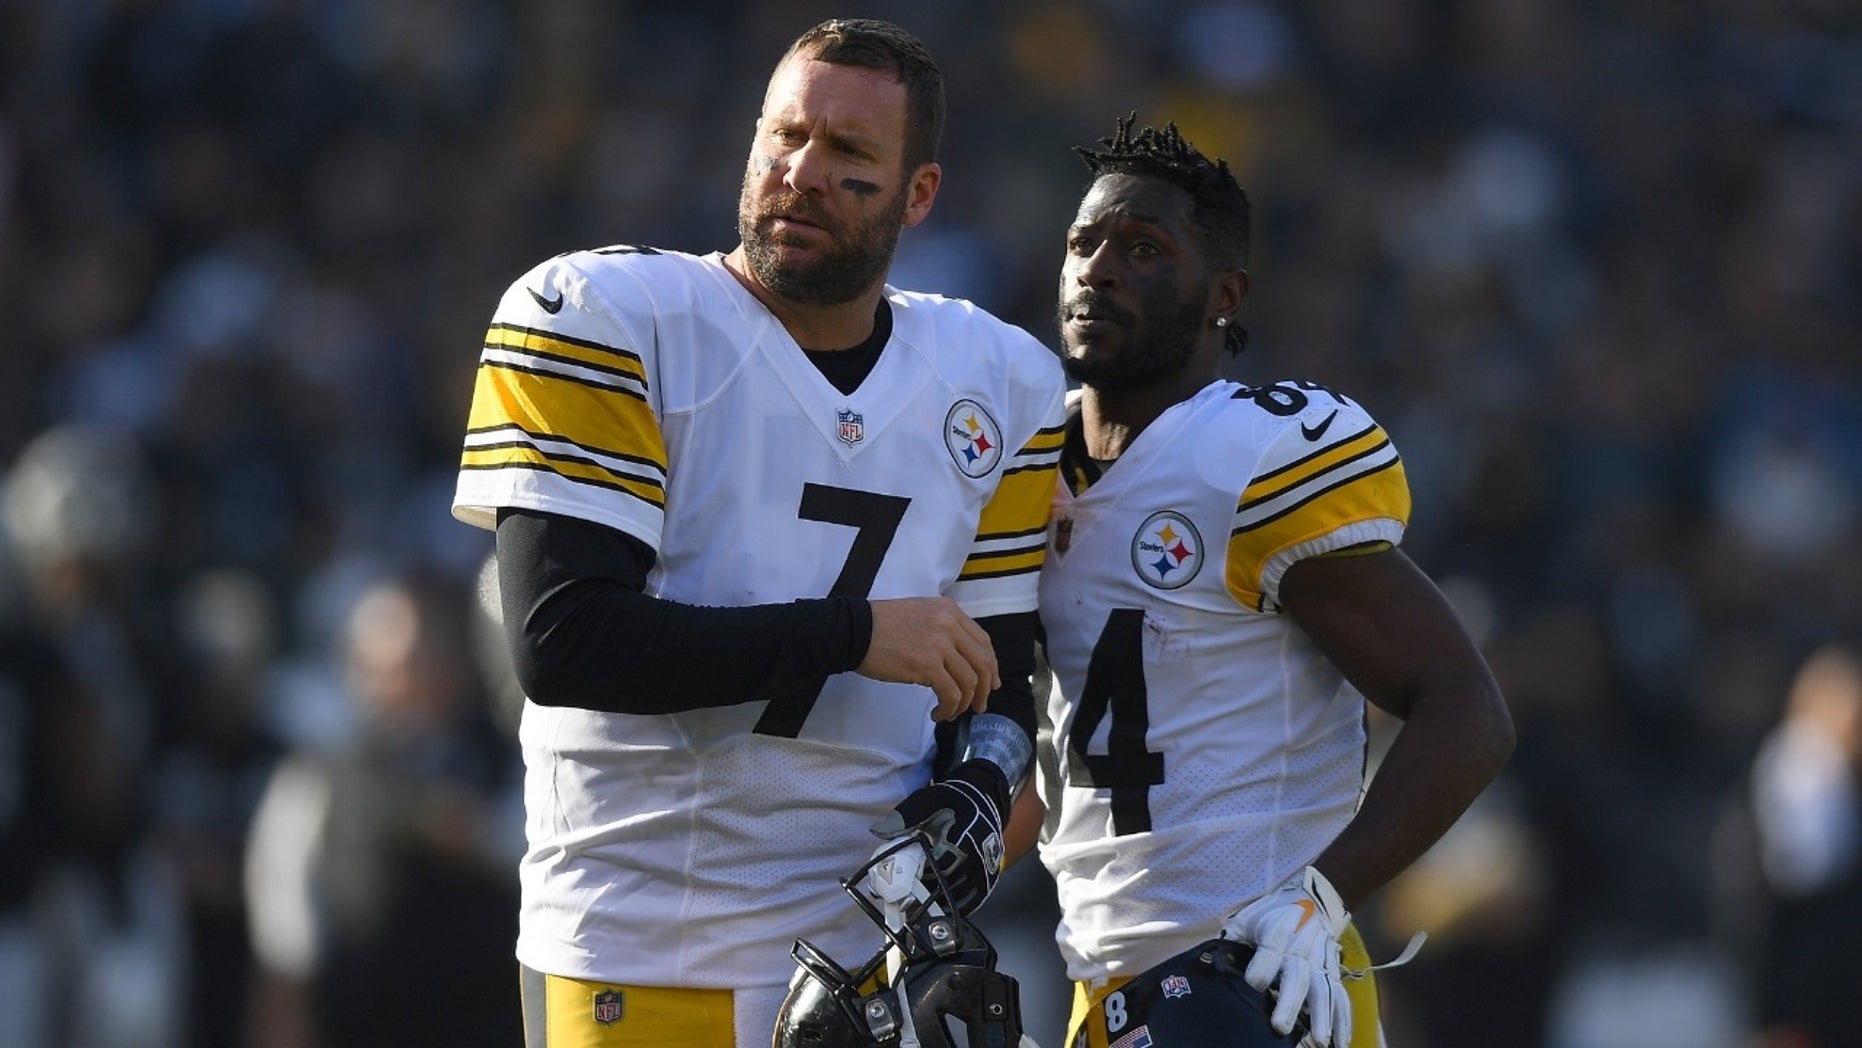 Steelers star Antonio Brown benched after dispute with Ben Roethlisberger, report says